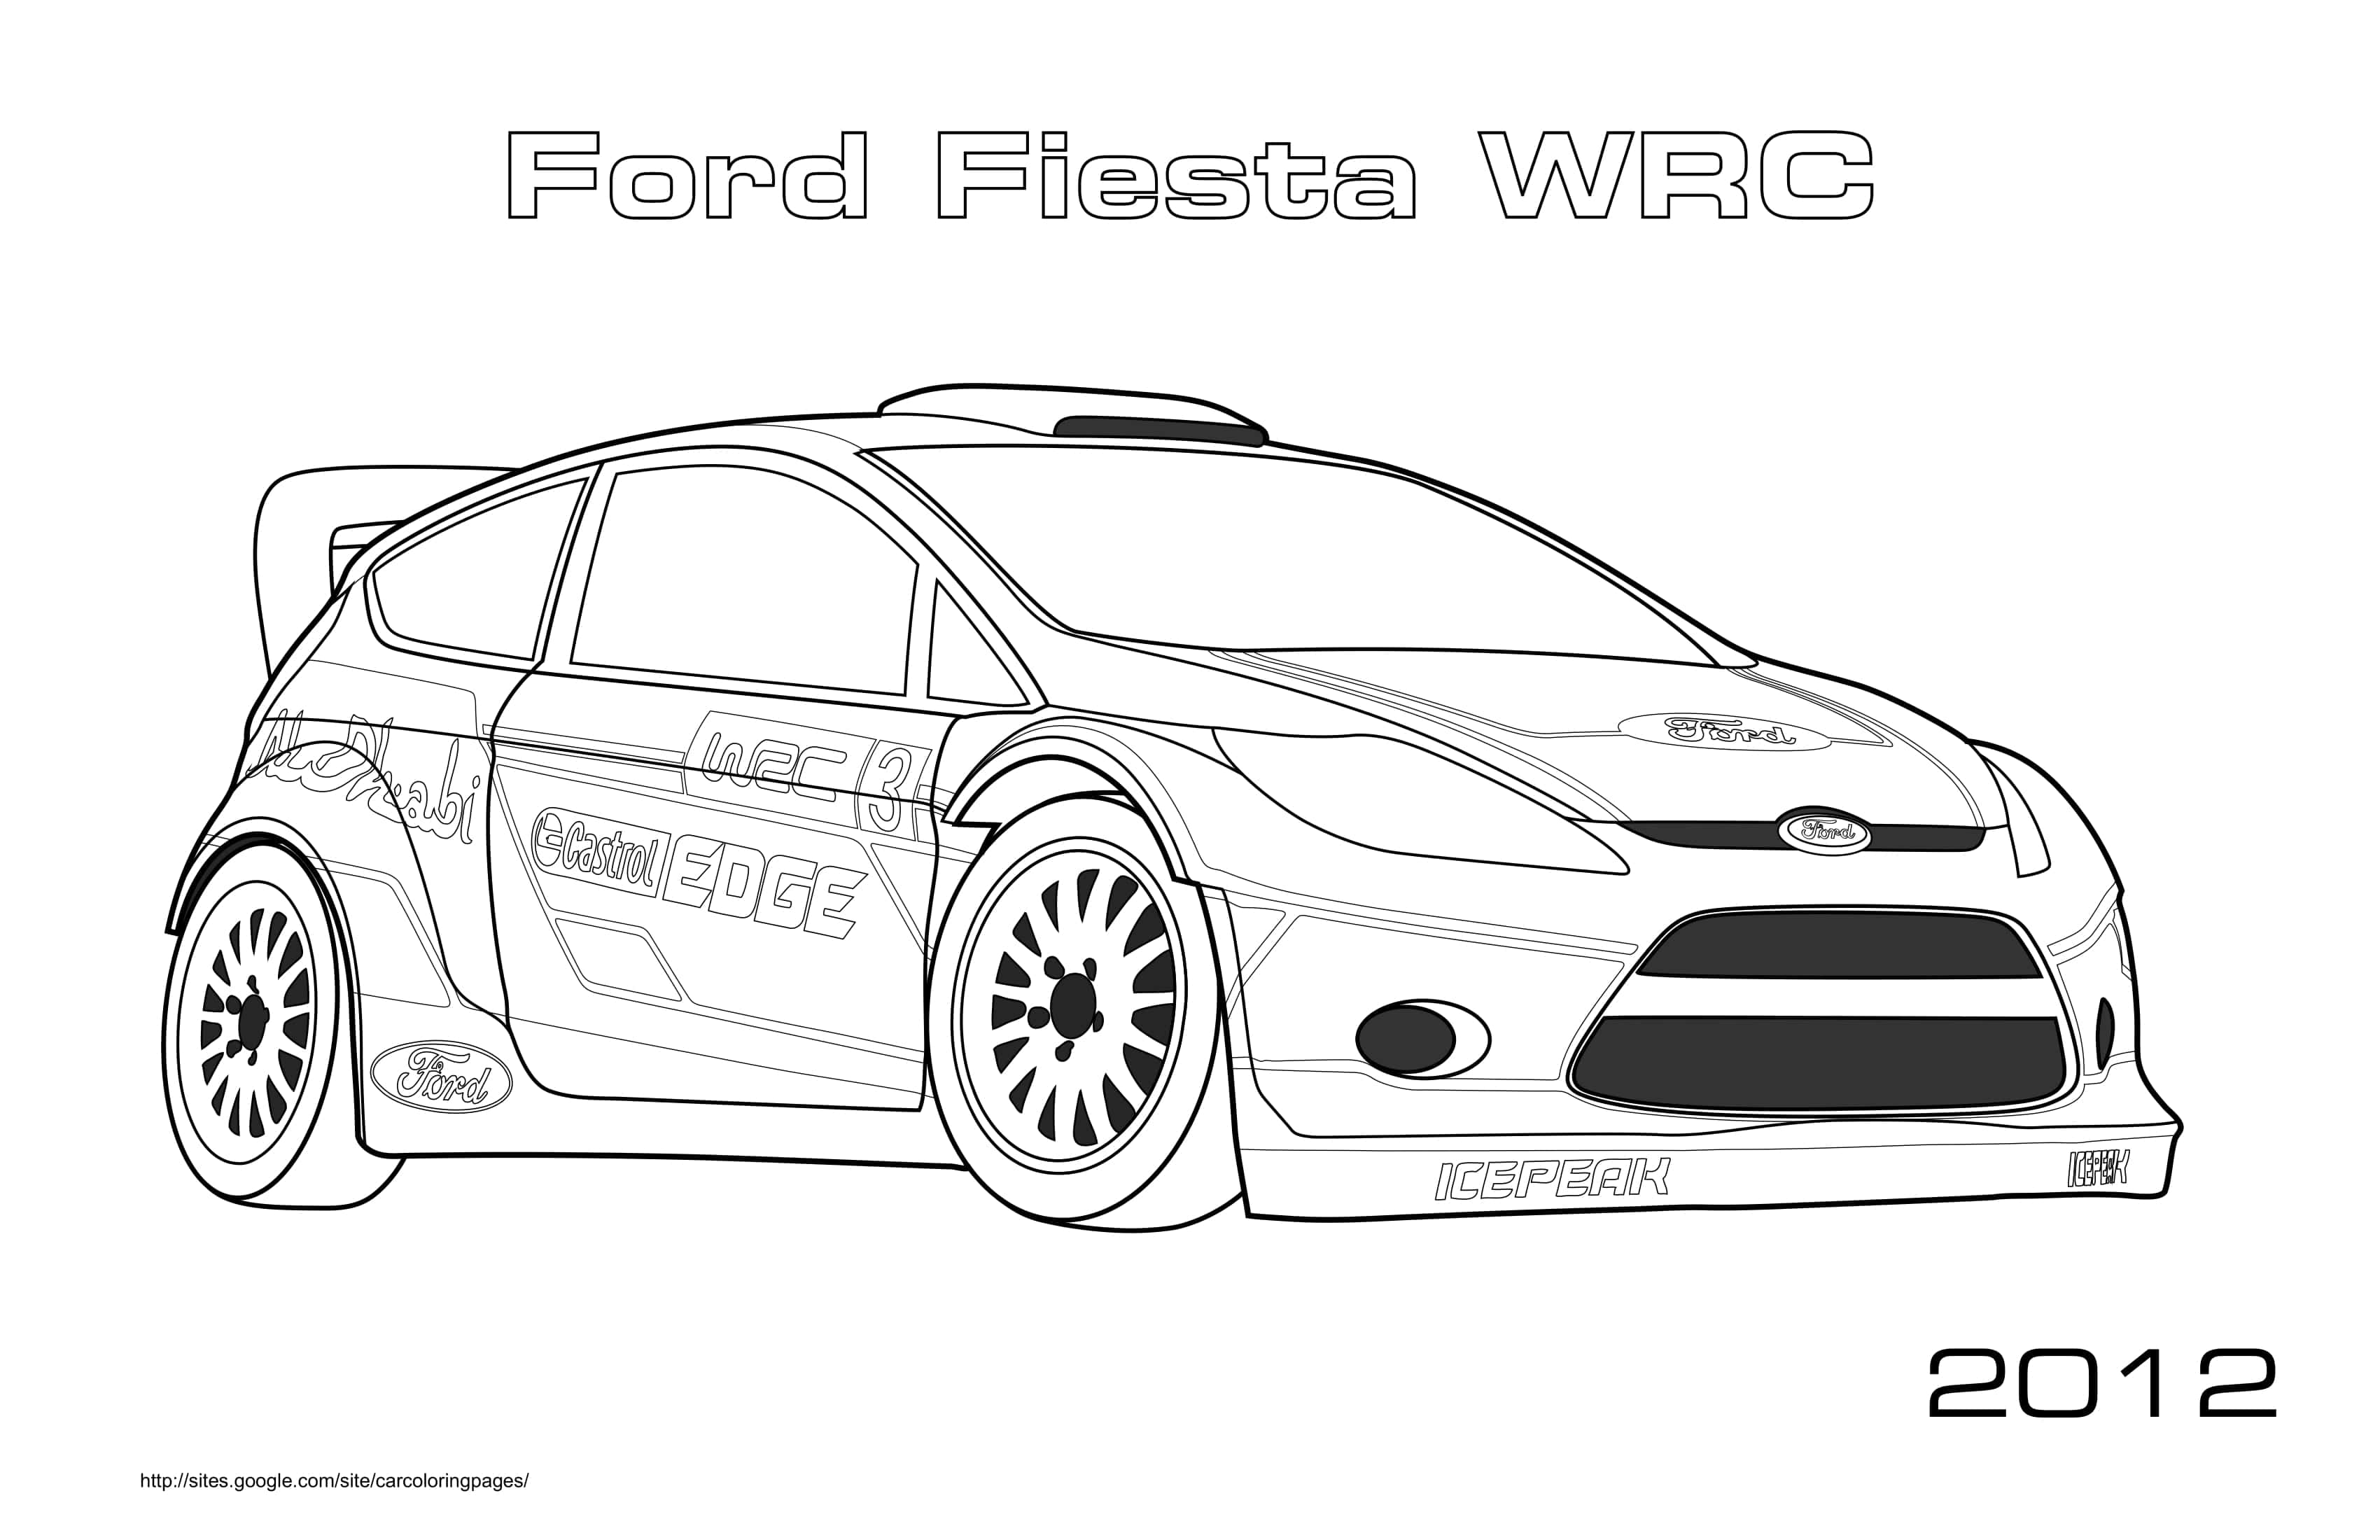 Ford Fiesta Wrc 2012 Coloring Page